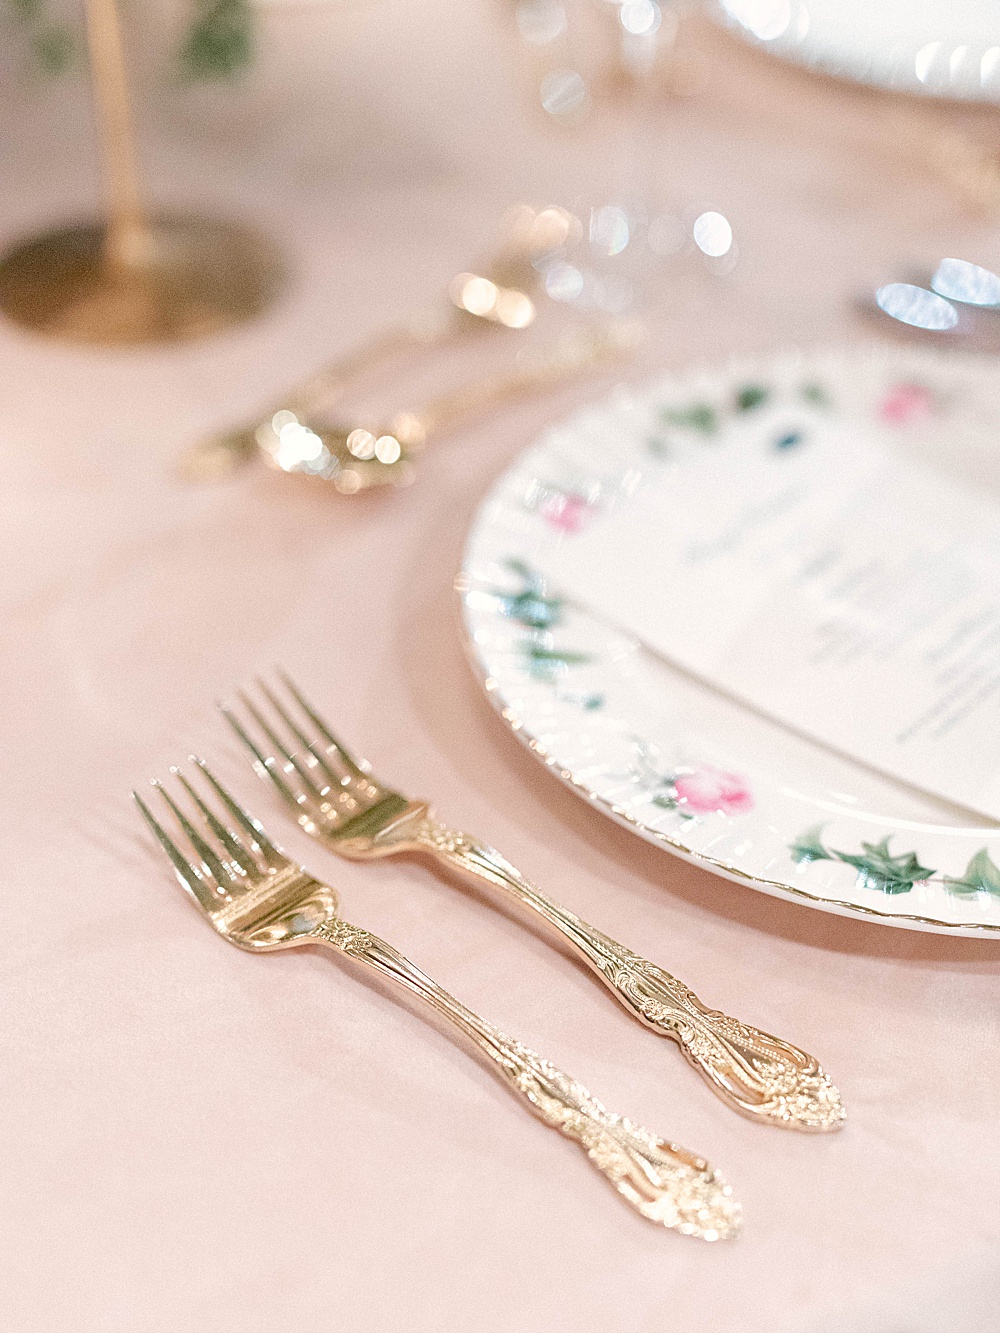 antique flatware with china